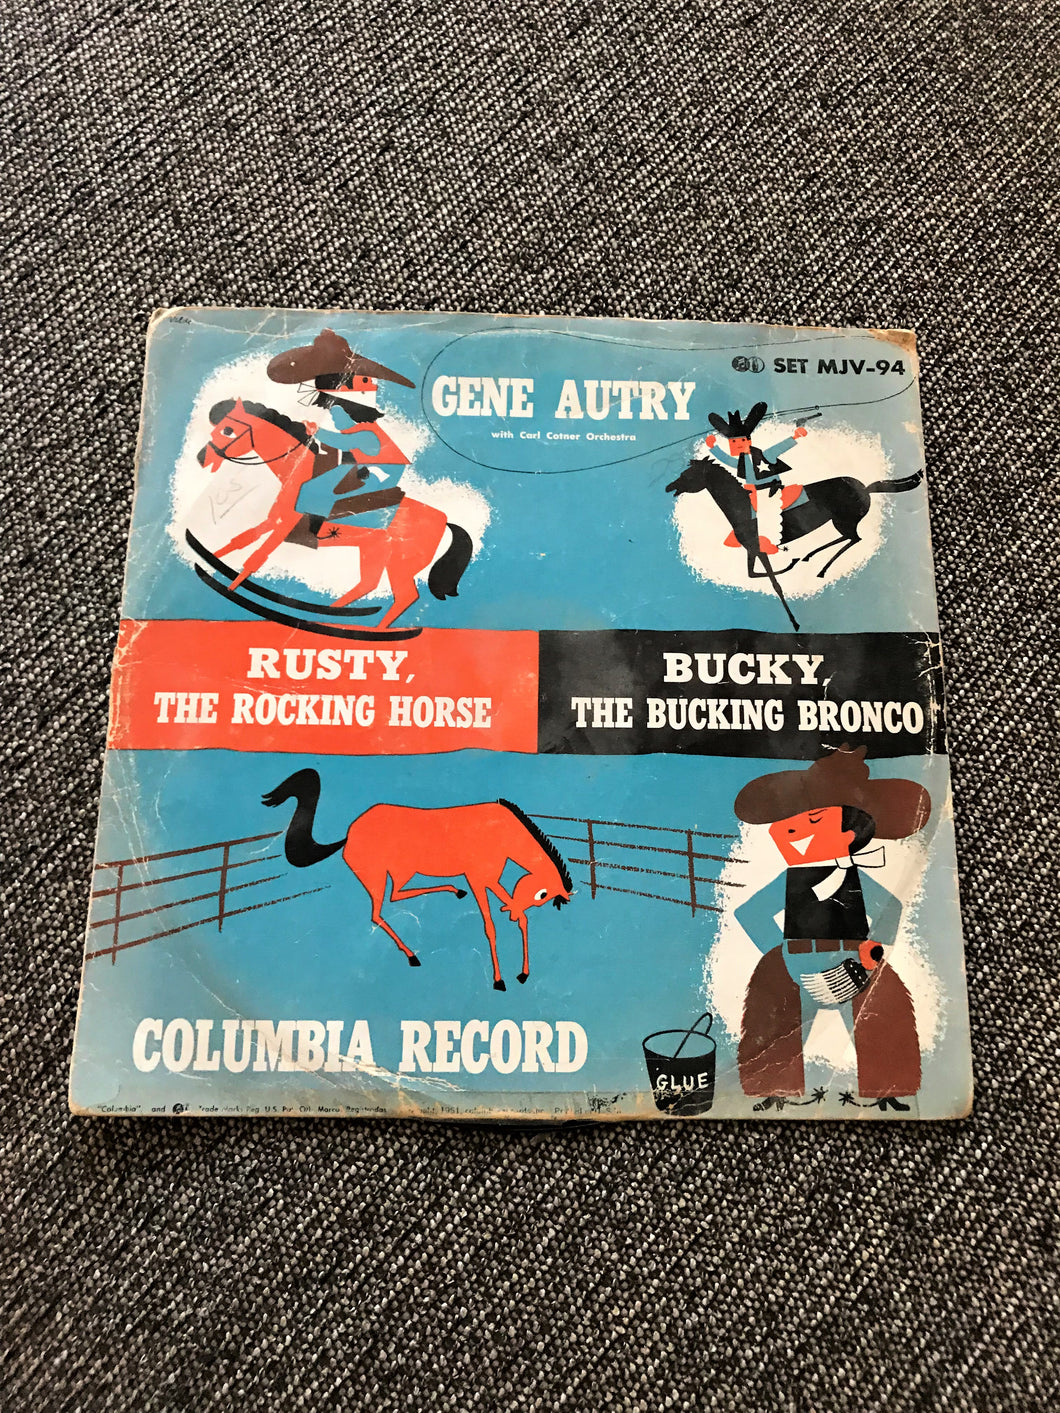 VERY, VERY RARE AND HIGHLY-COLLECTIBLE! GENE AUTRY'S ALBUM:  